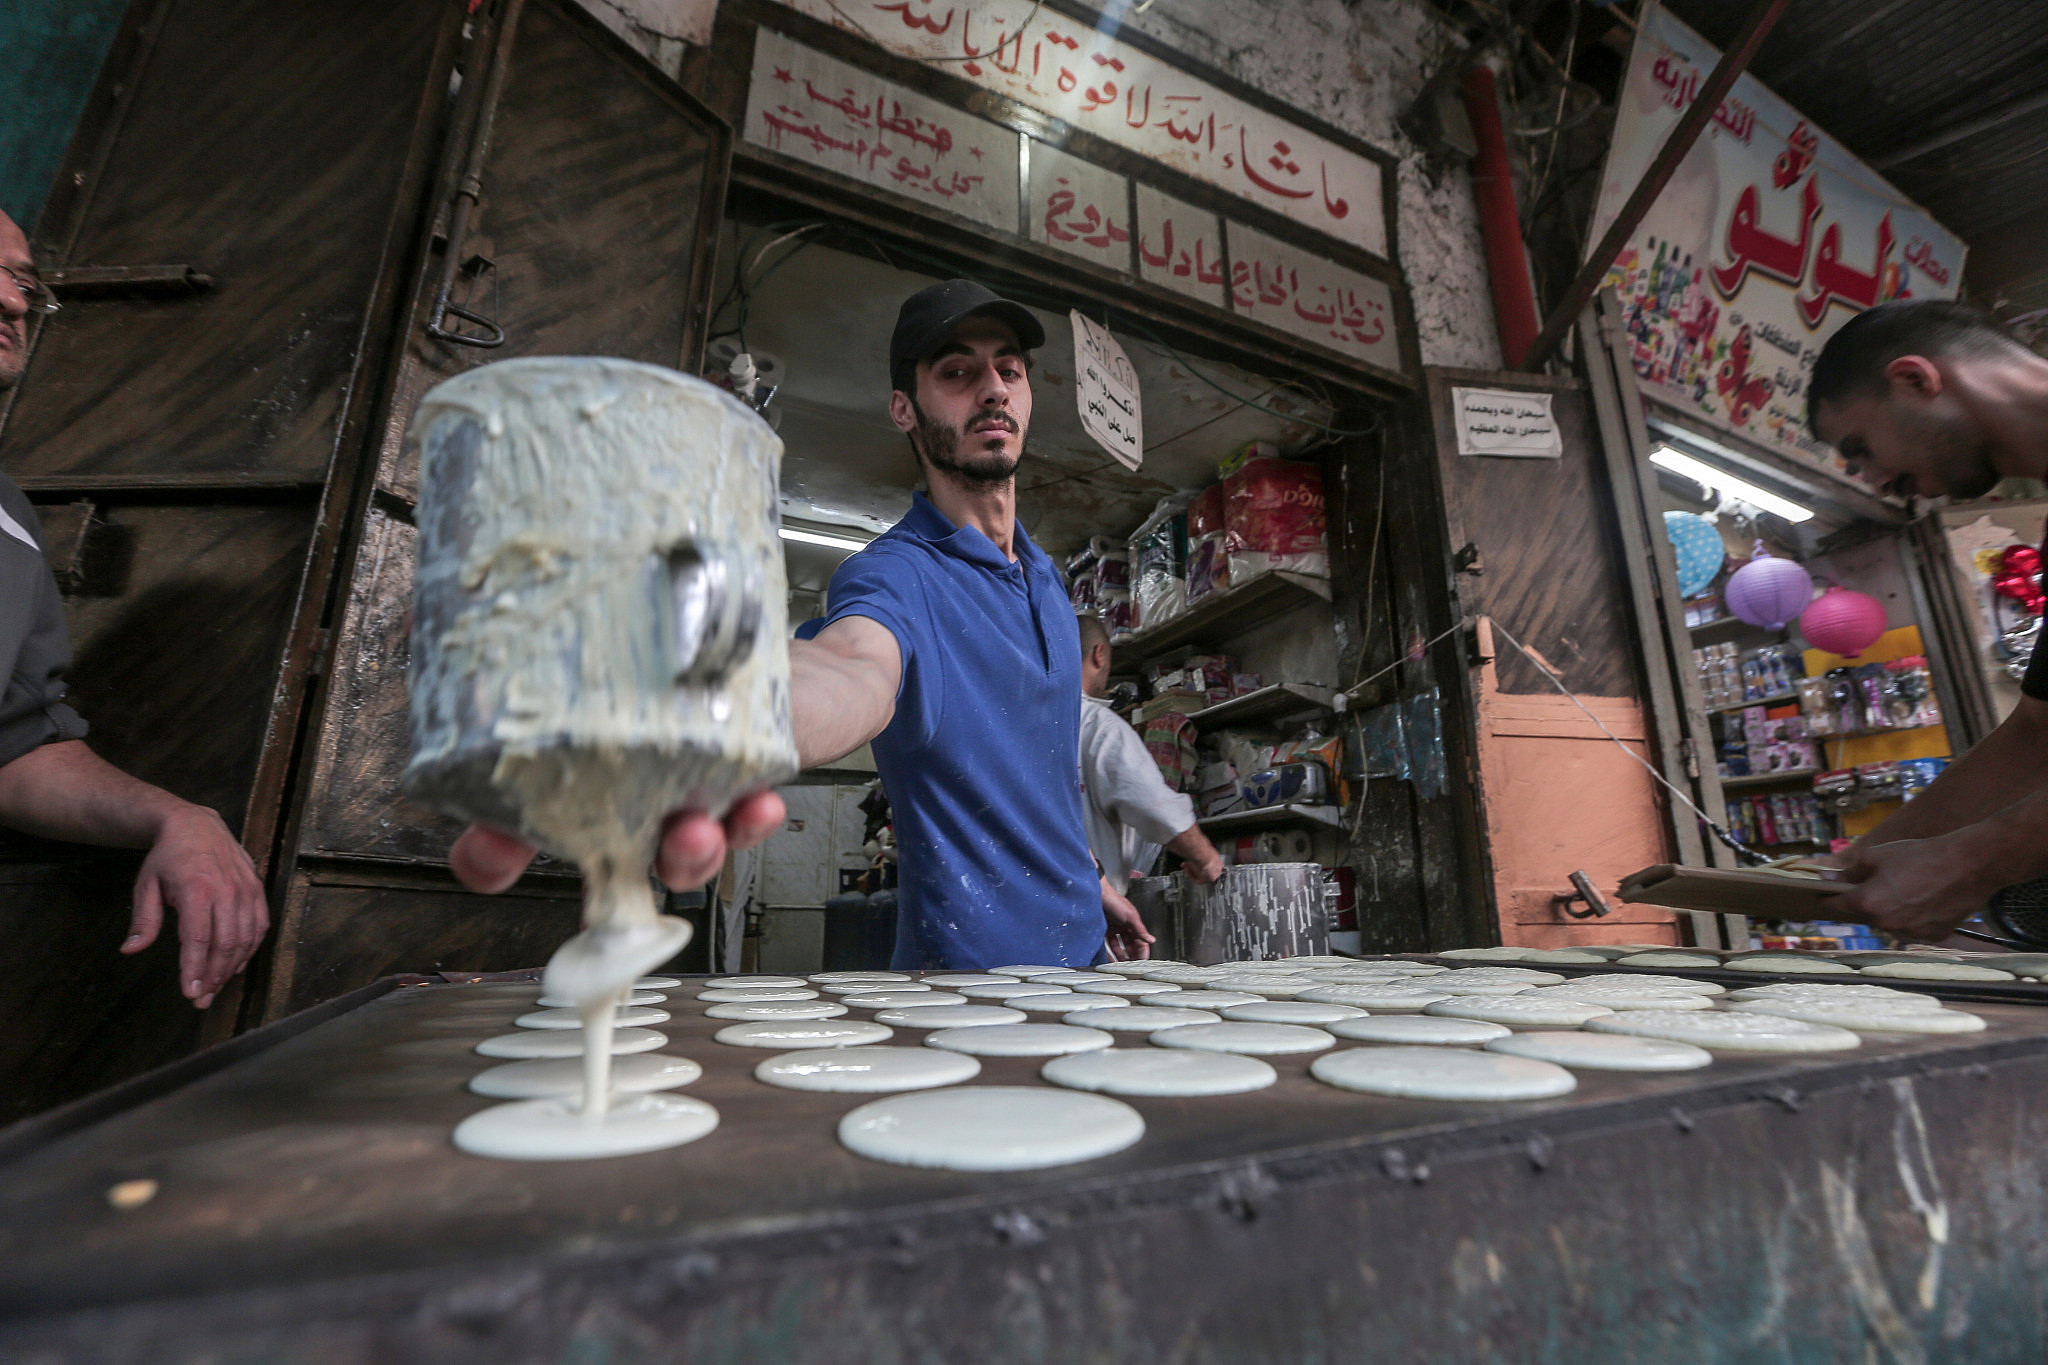 The coronavirus compounded the economic crisis in Gaza. For Abu Mahmoud, reducing the price of qatayef has not helped sales. Gaza City, April 27, 2020. (Mohammed Zaanoun)